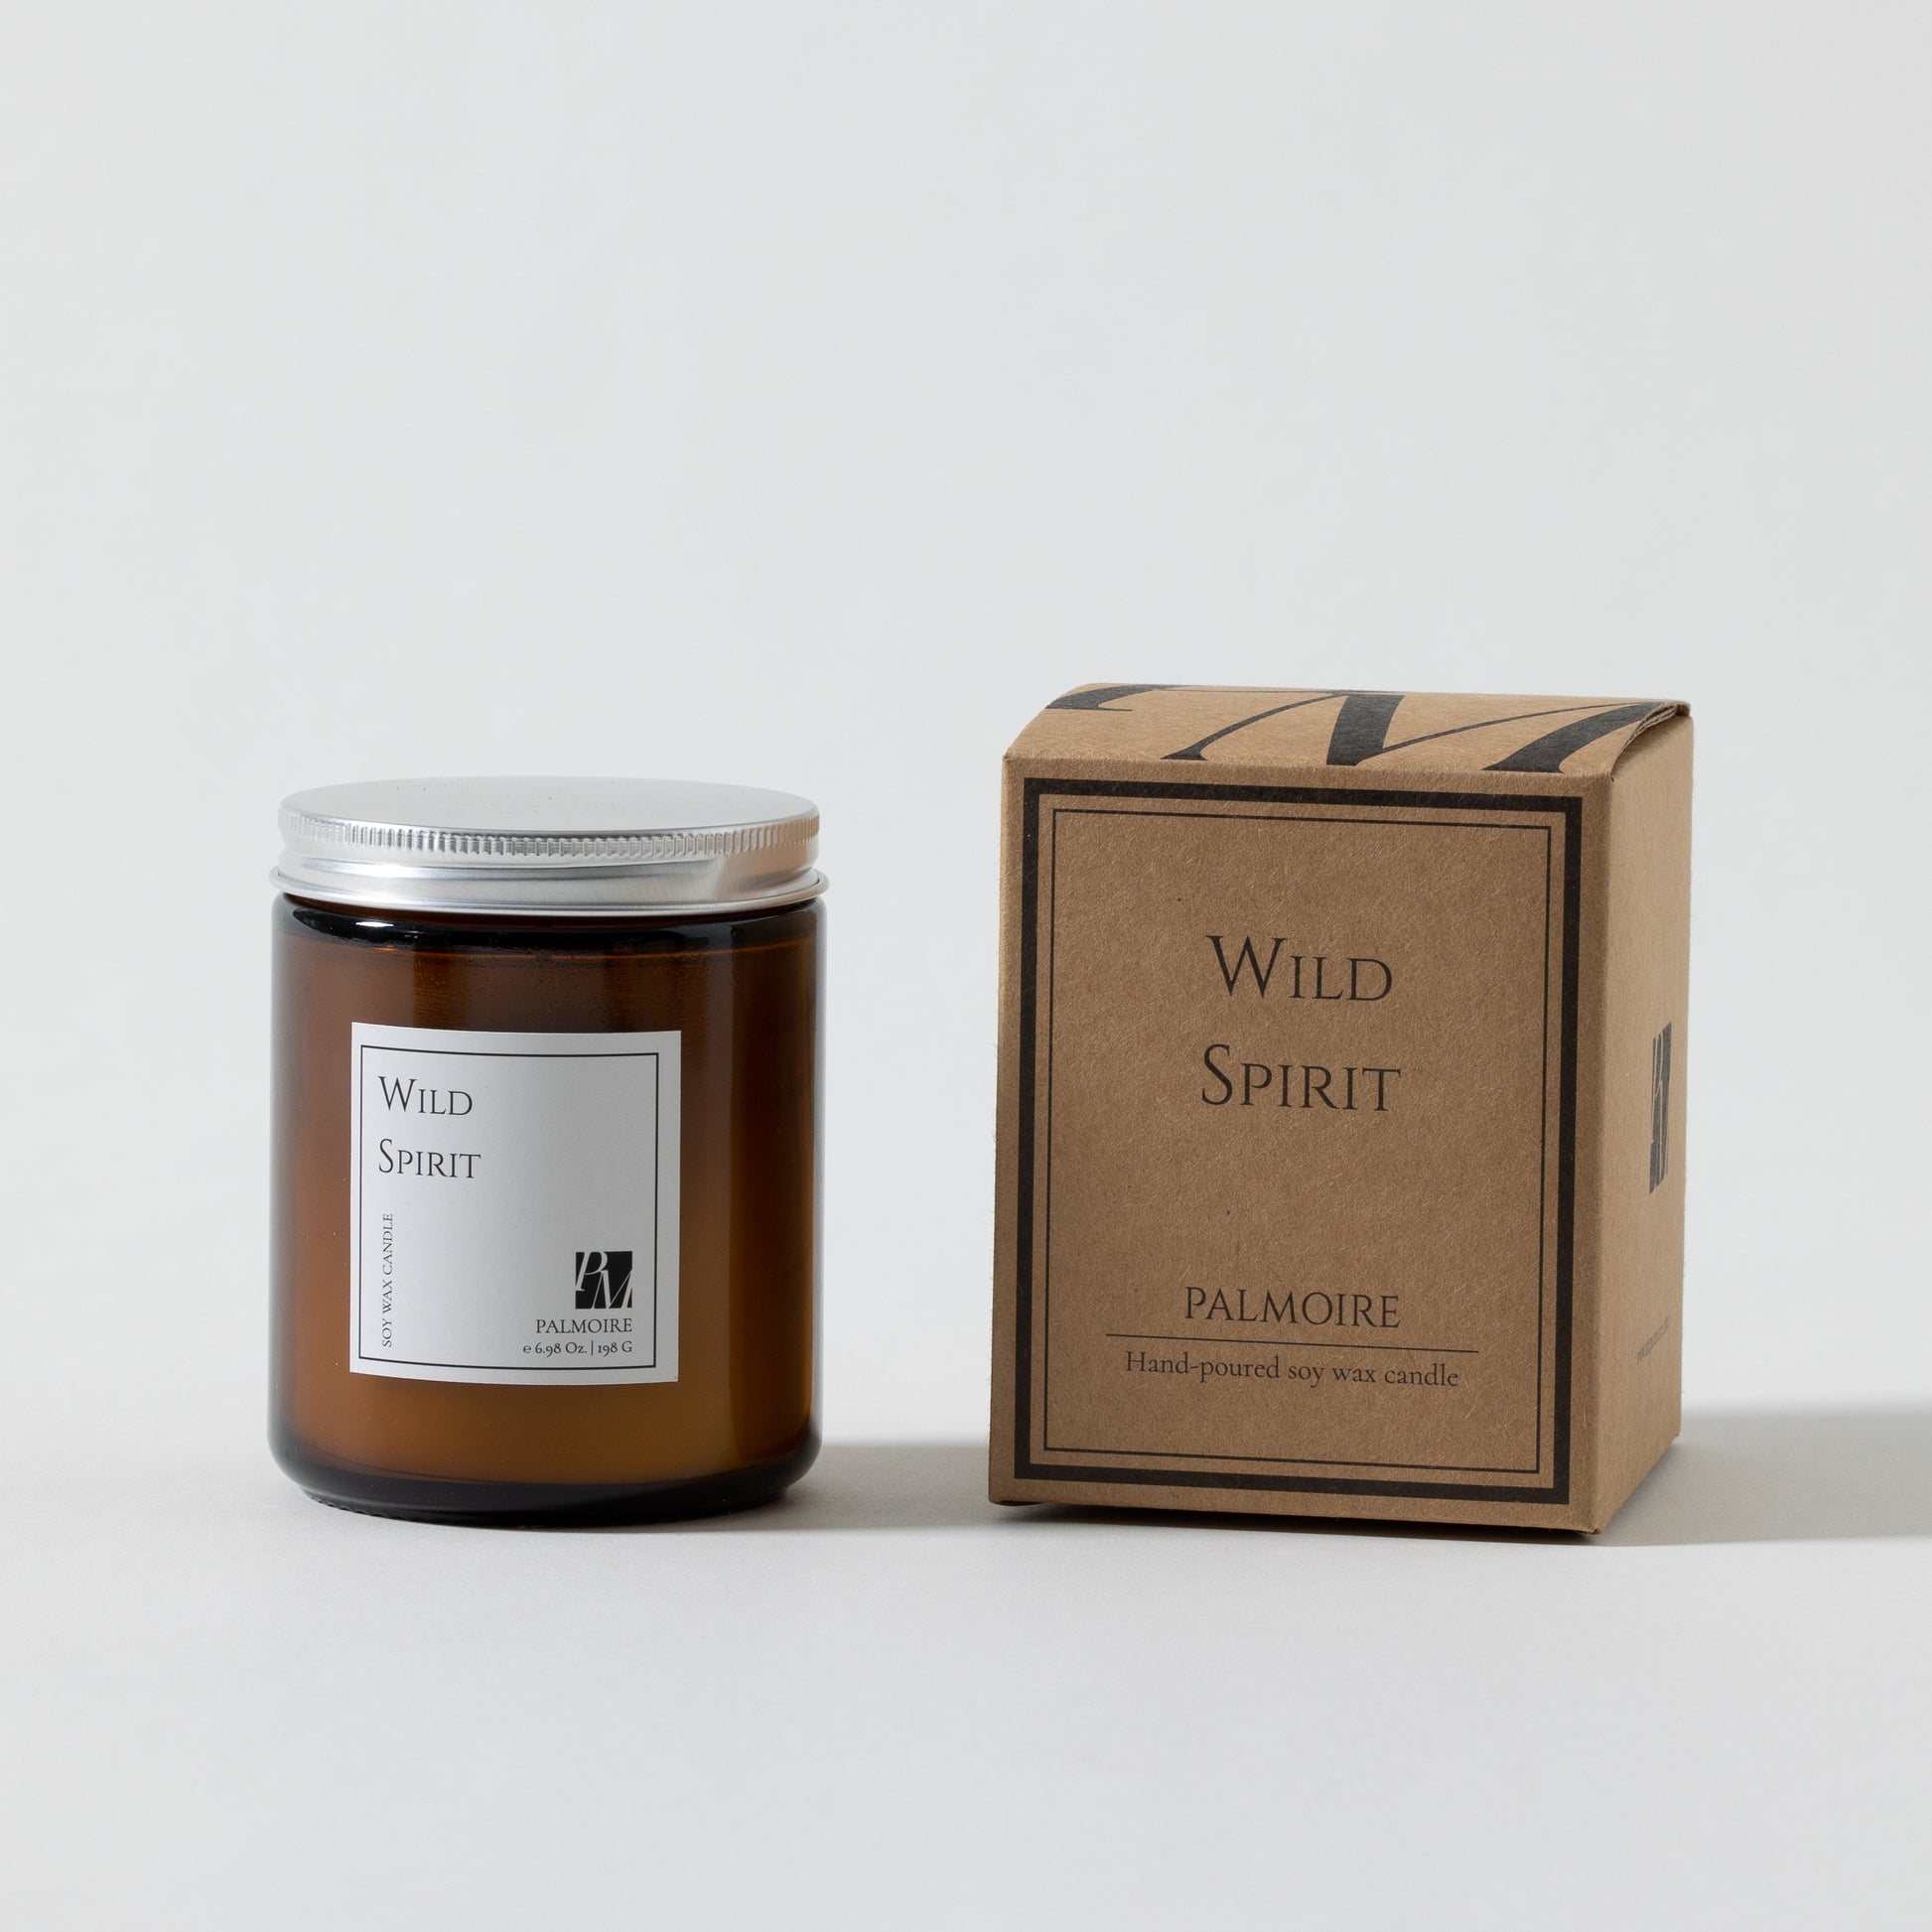 Wild Spirit Soy Wax Candle - PALMOIRE